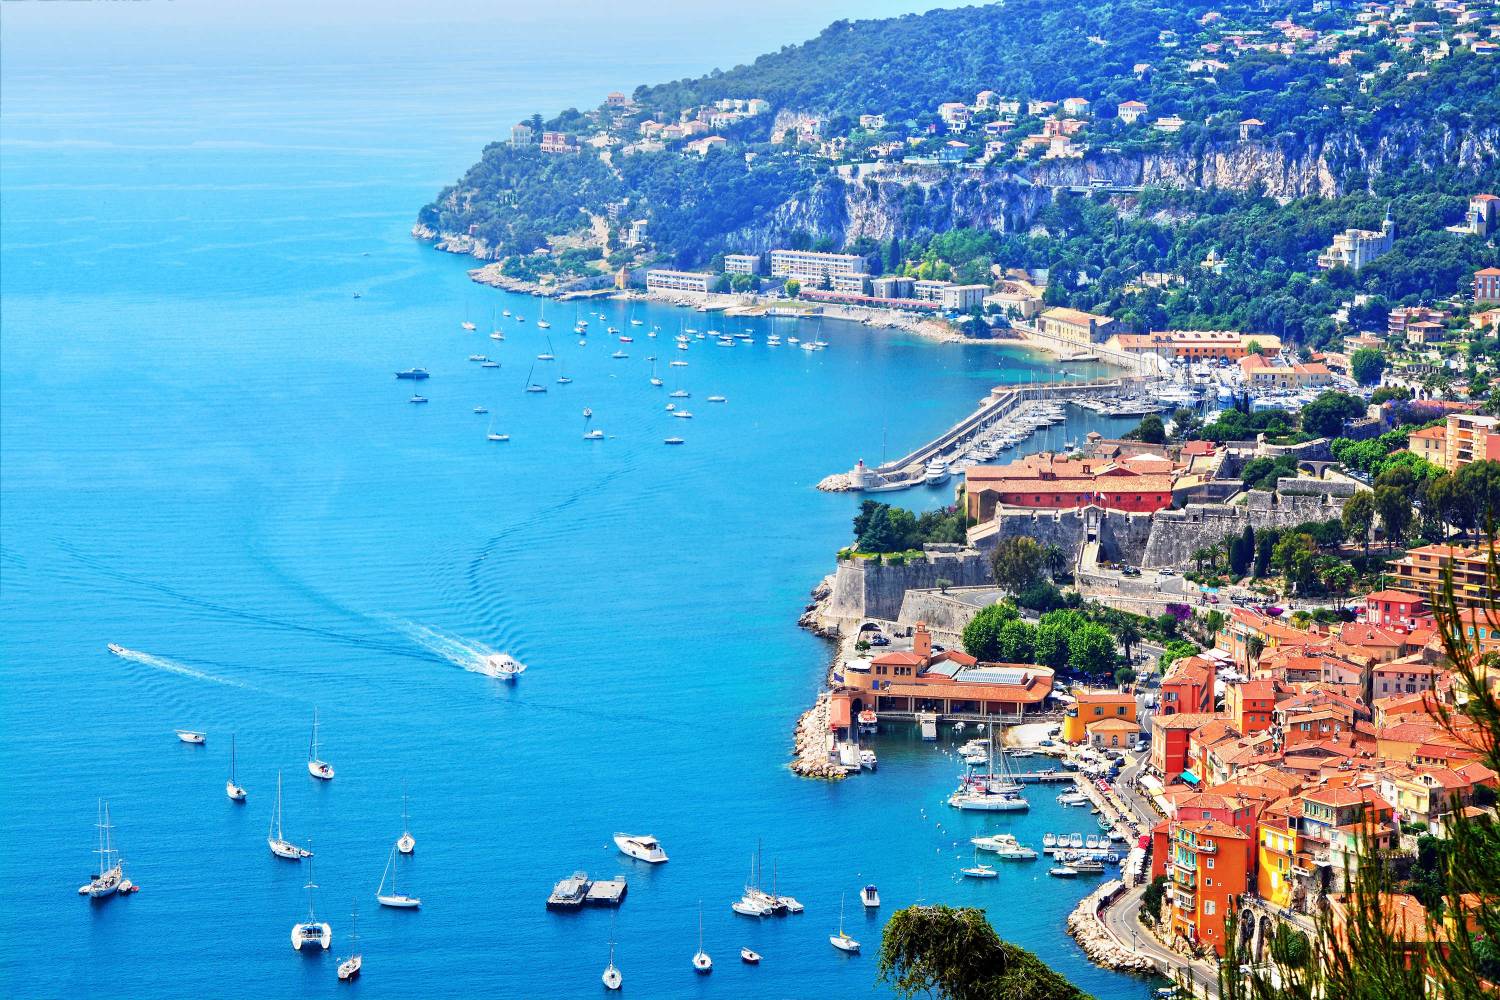 Enjoy a private chef after an amazing day in French Riviera - Take a Chef